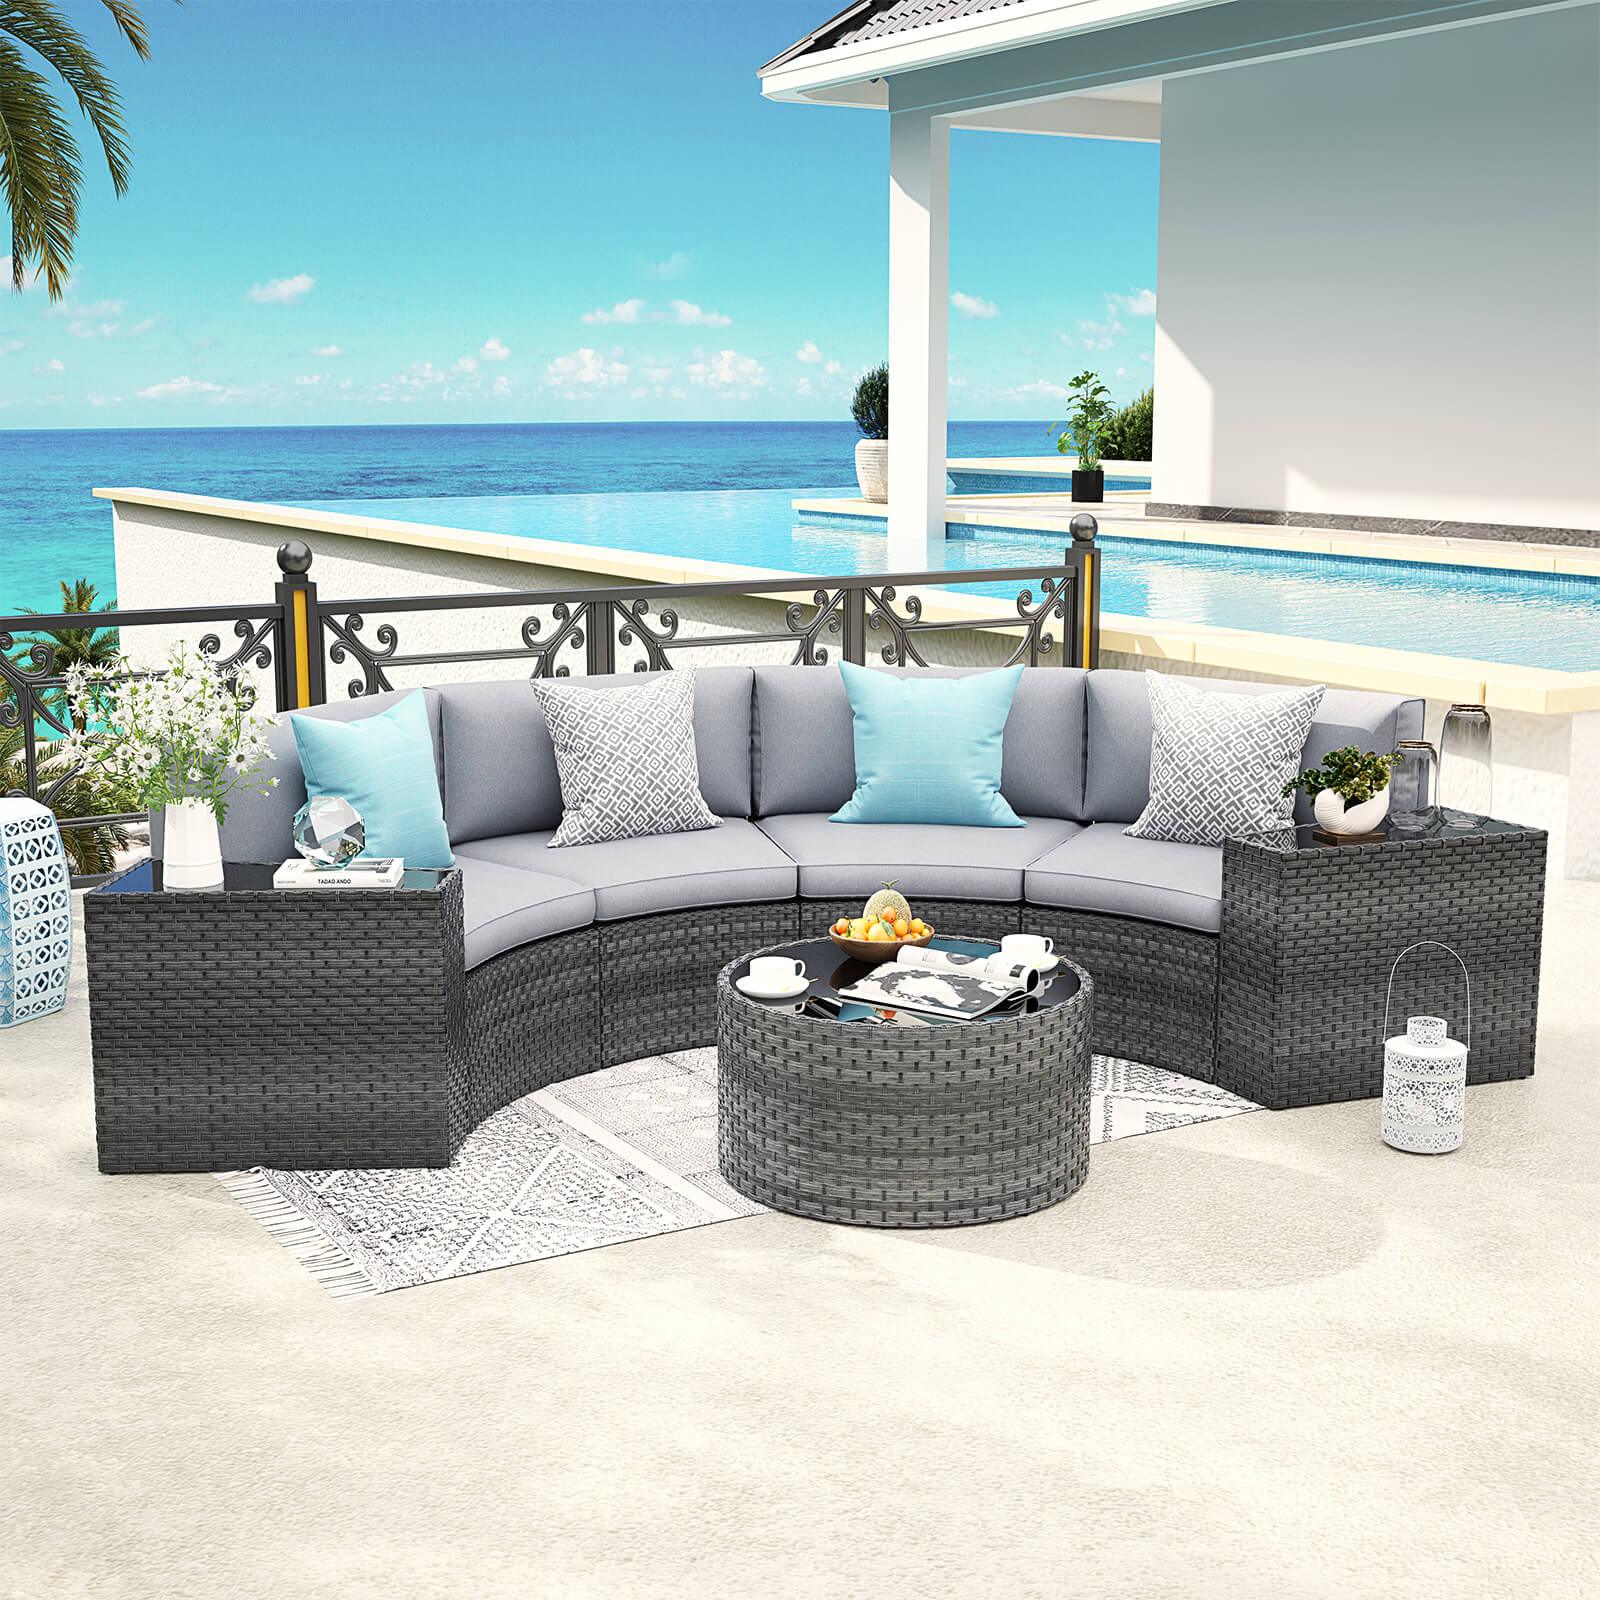 Boboli 7-piece Grey Wicker Curved Sectional Set with grey cushions, 1 Round Glass Table + 2 glass top side tables + 4 sectional sofas, front- Jardina Furniture #color_Grey